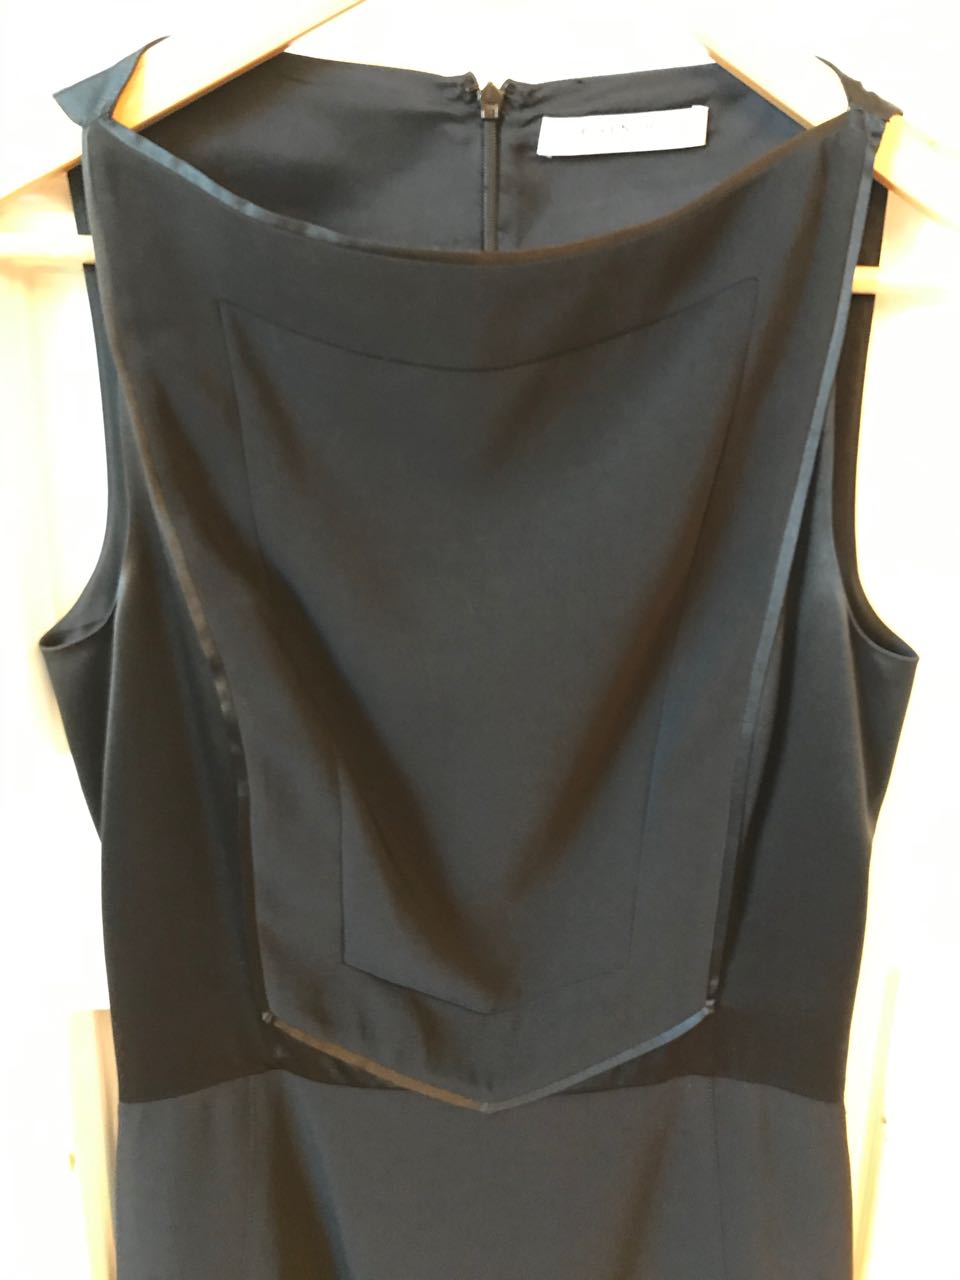 Robe Givenchy noire T.36